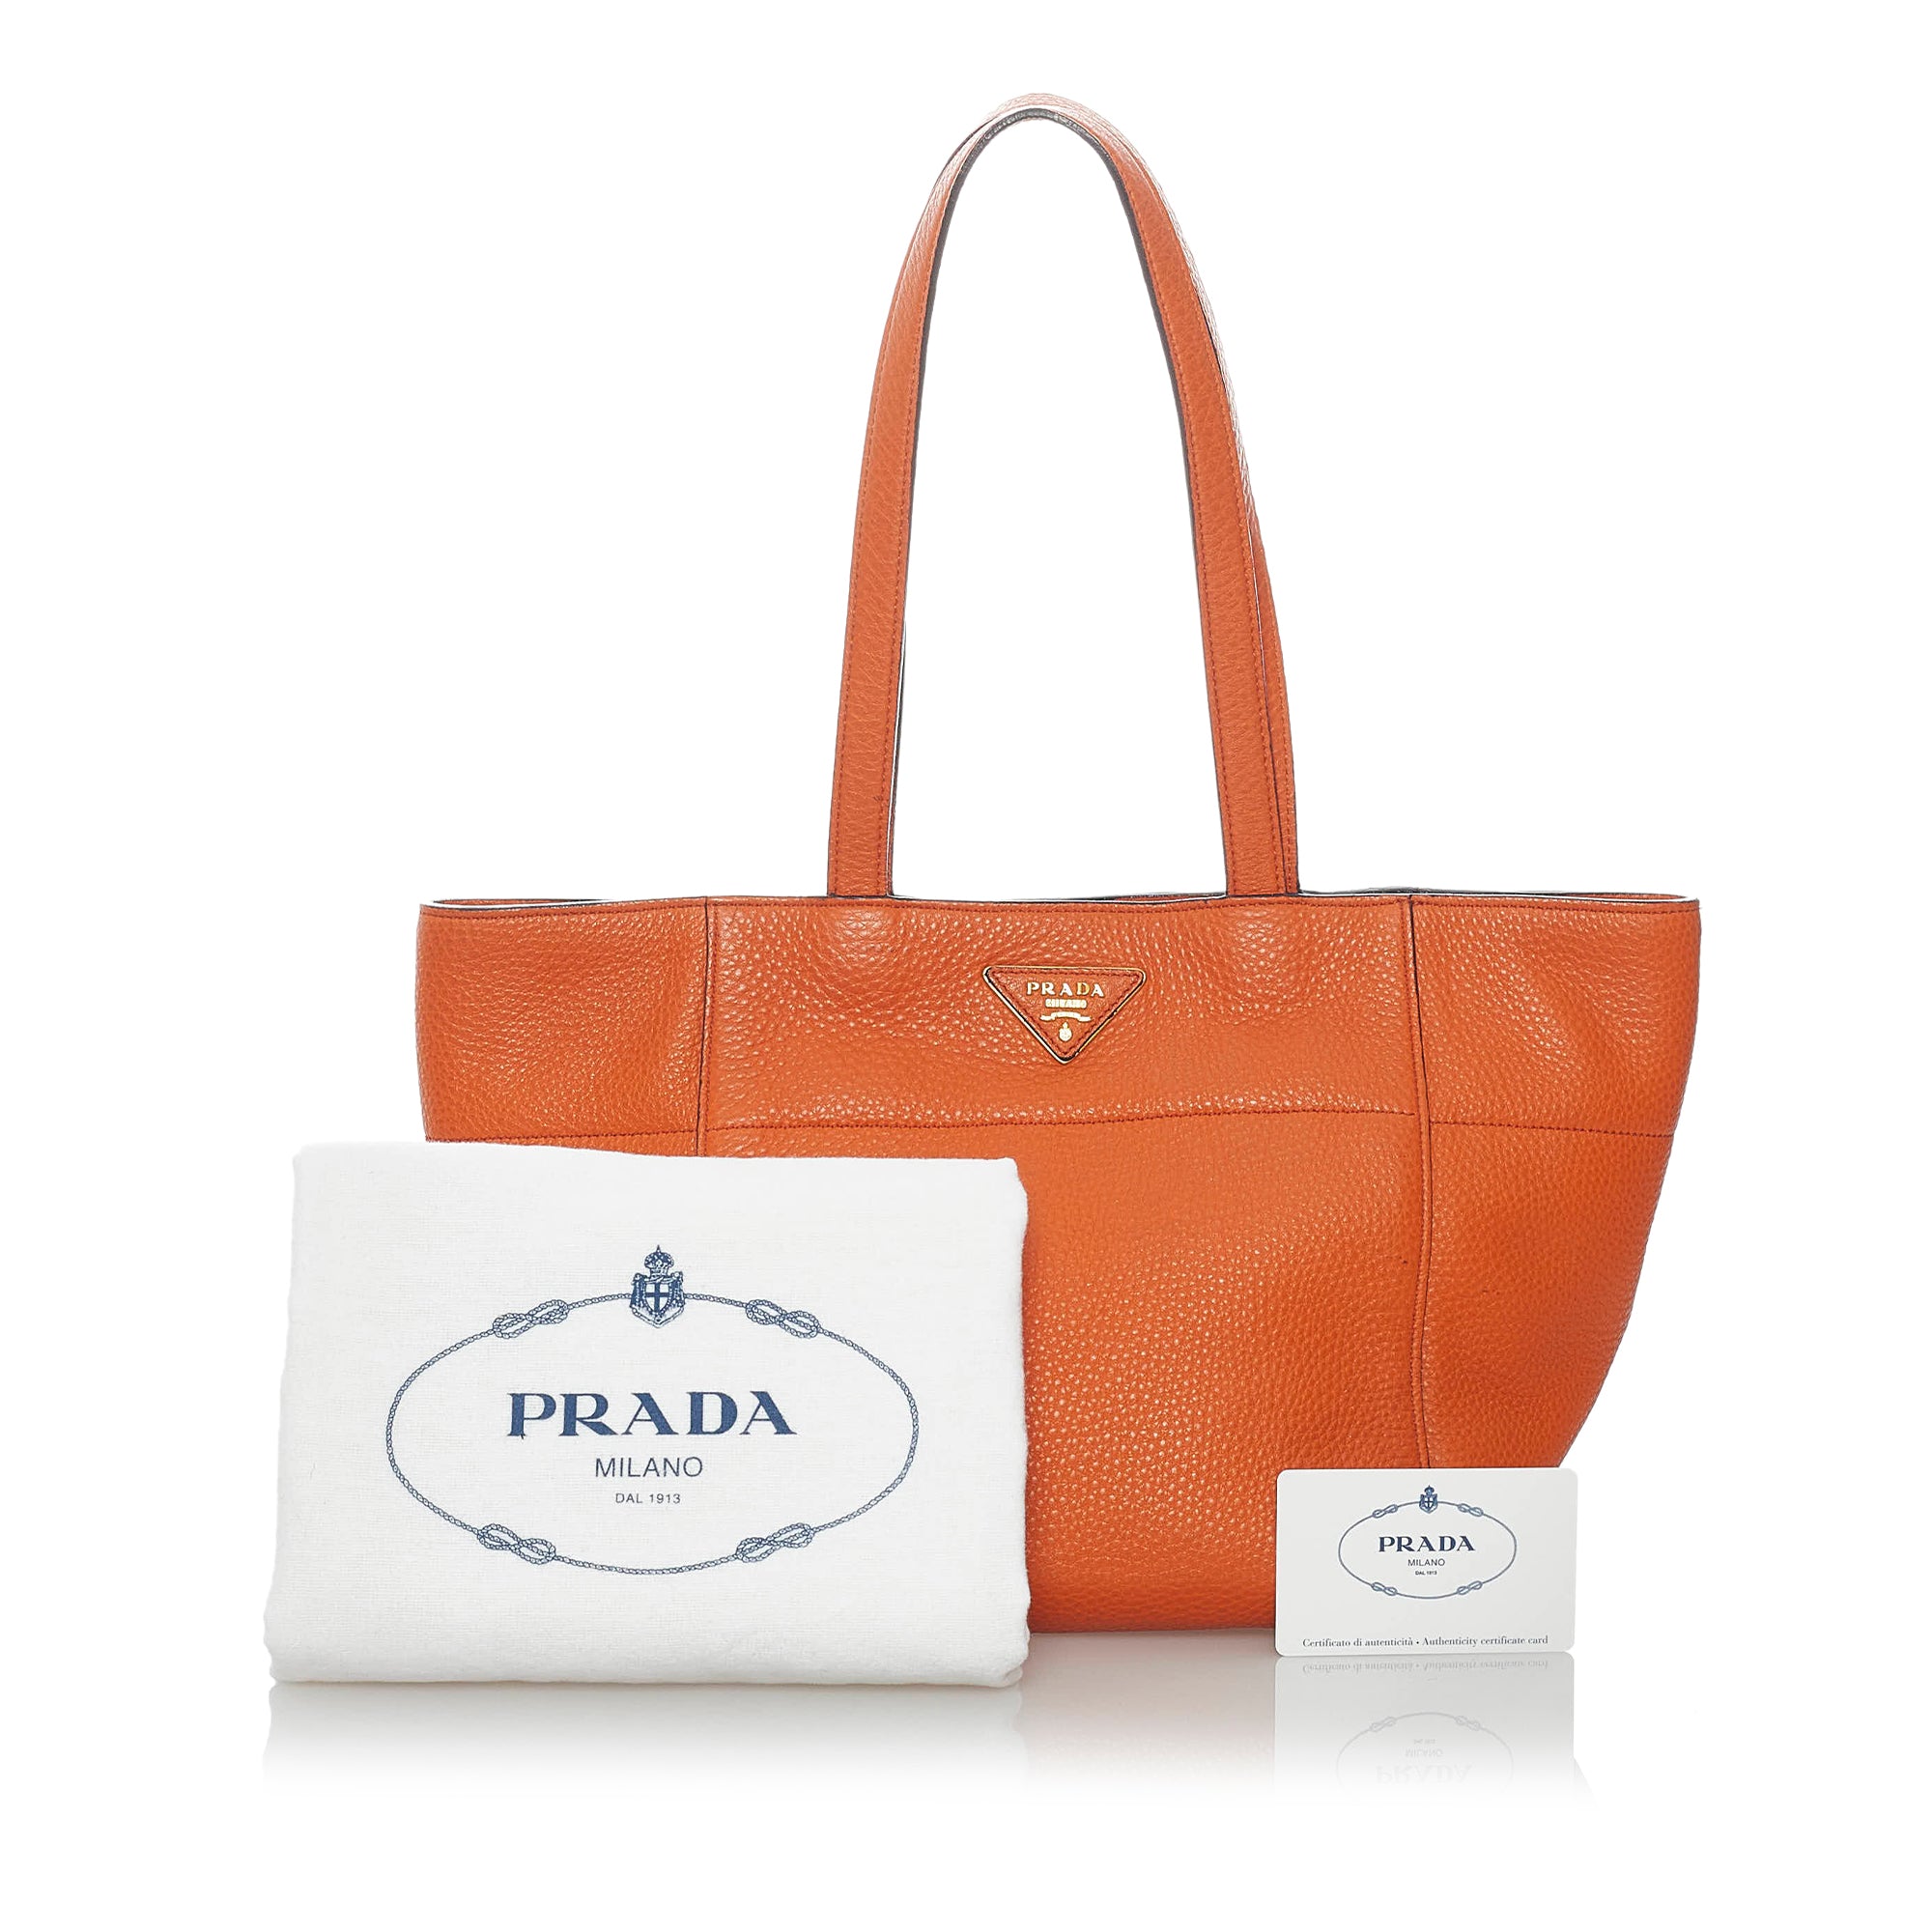 prada milano dal 1913 Hand Bag With Authenticity Certificate Card